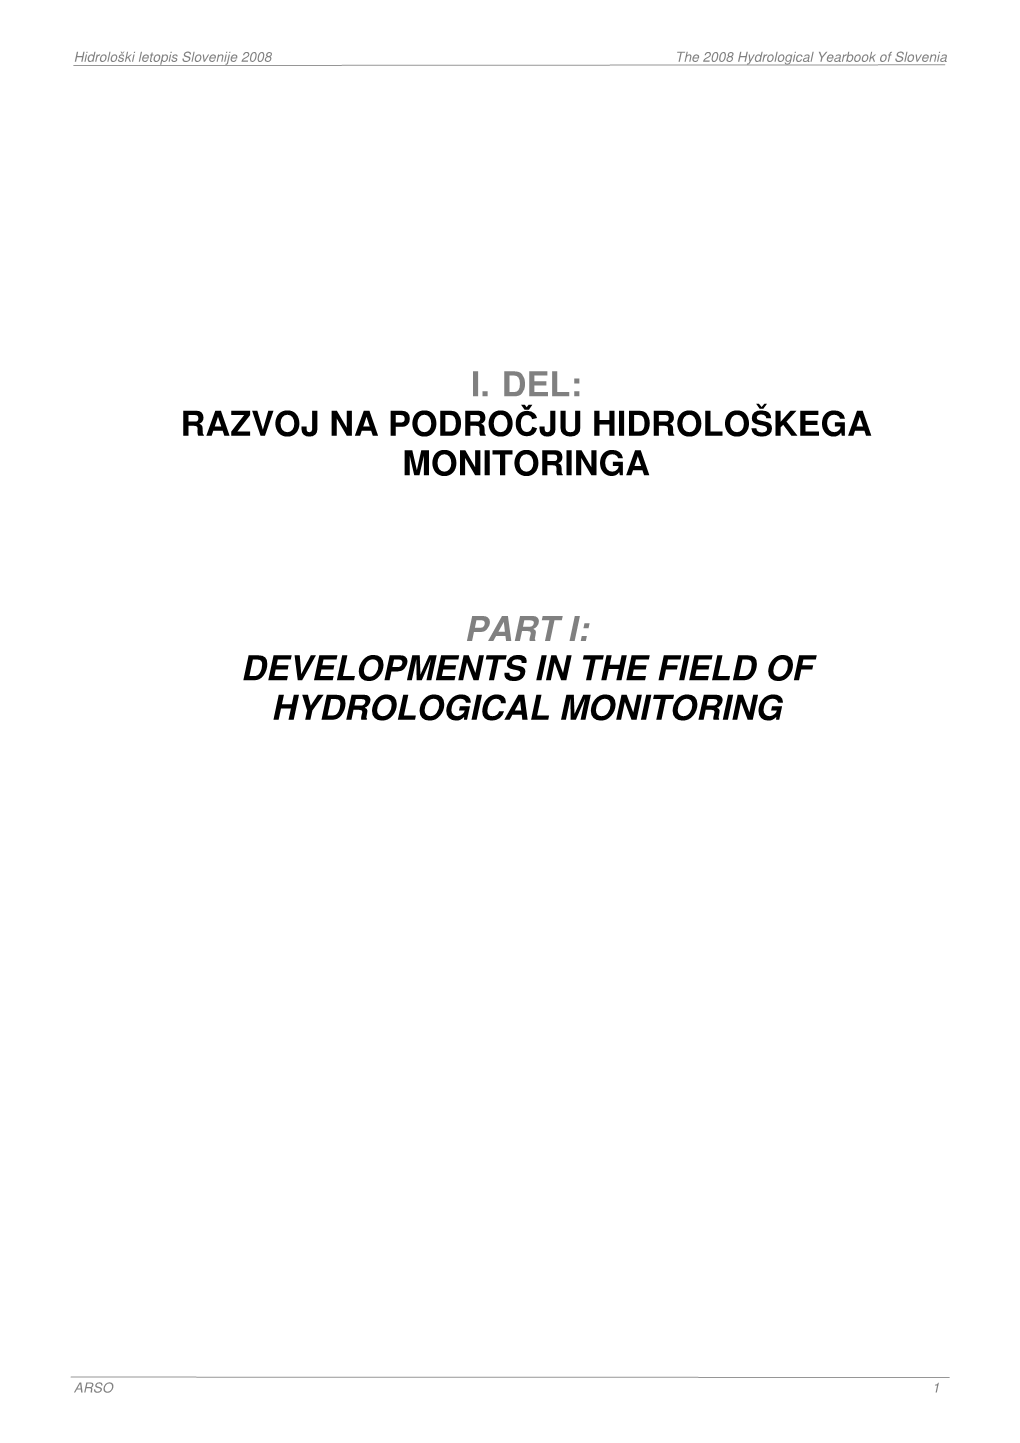 Developments in the Field of Hydrological Monitoring